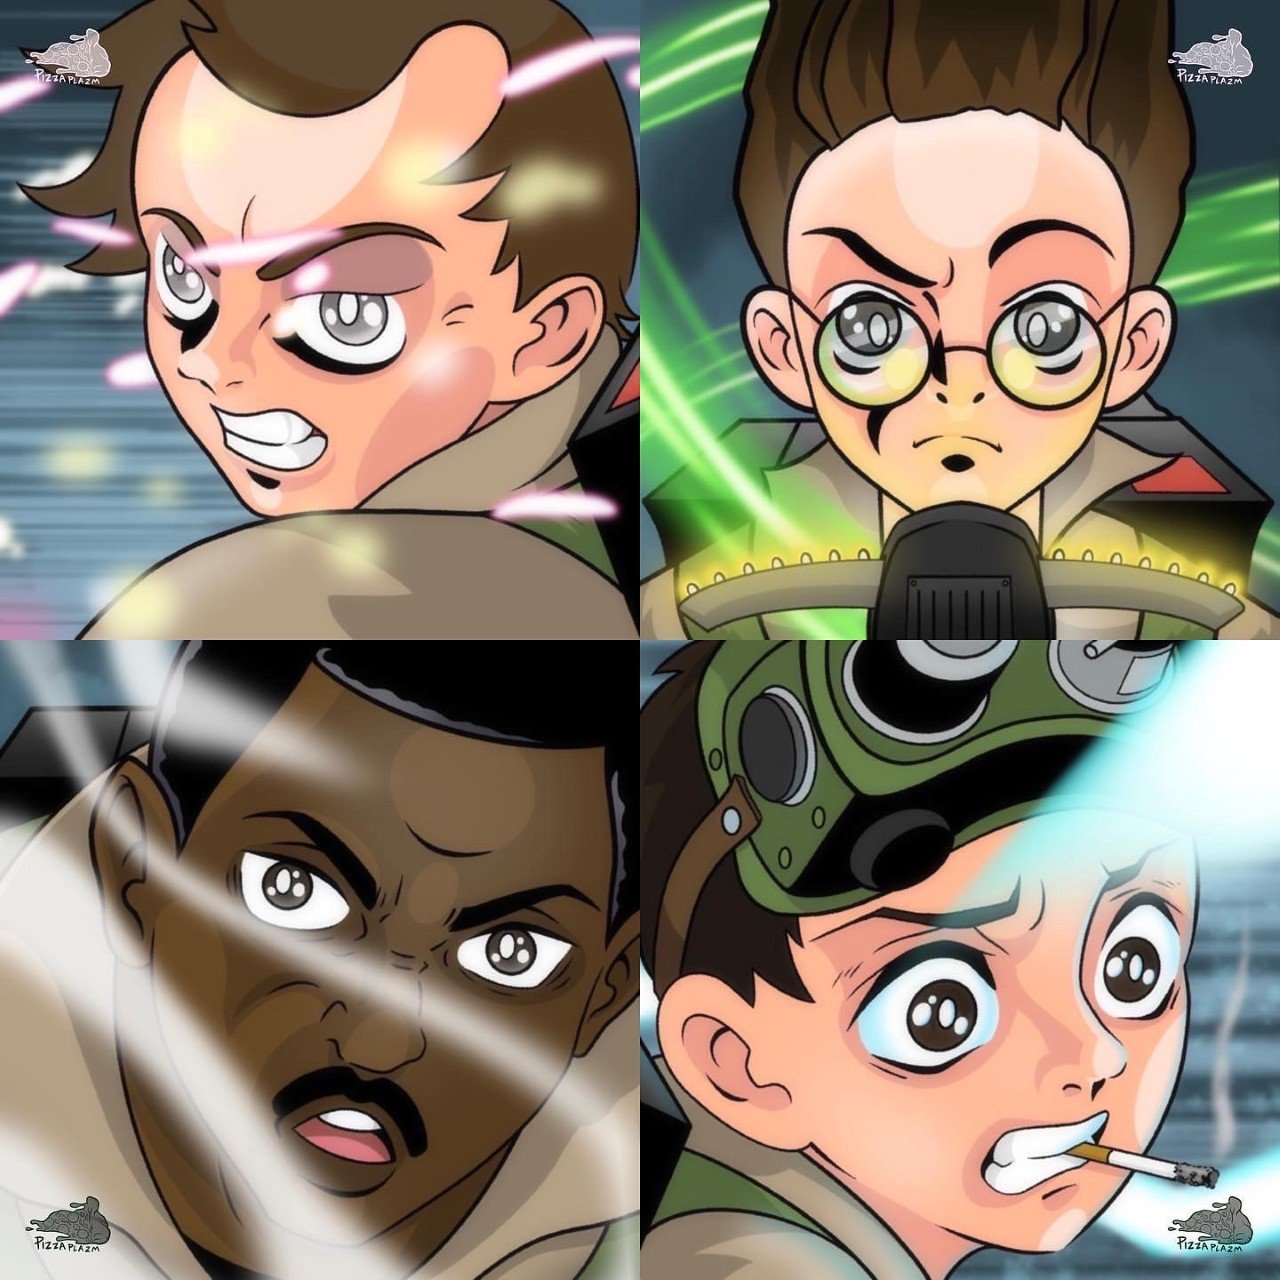 Ghostbusters (1984) - Anime Style